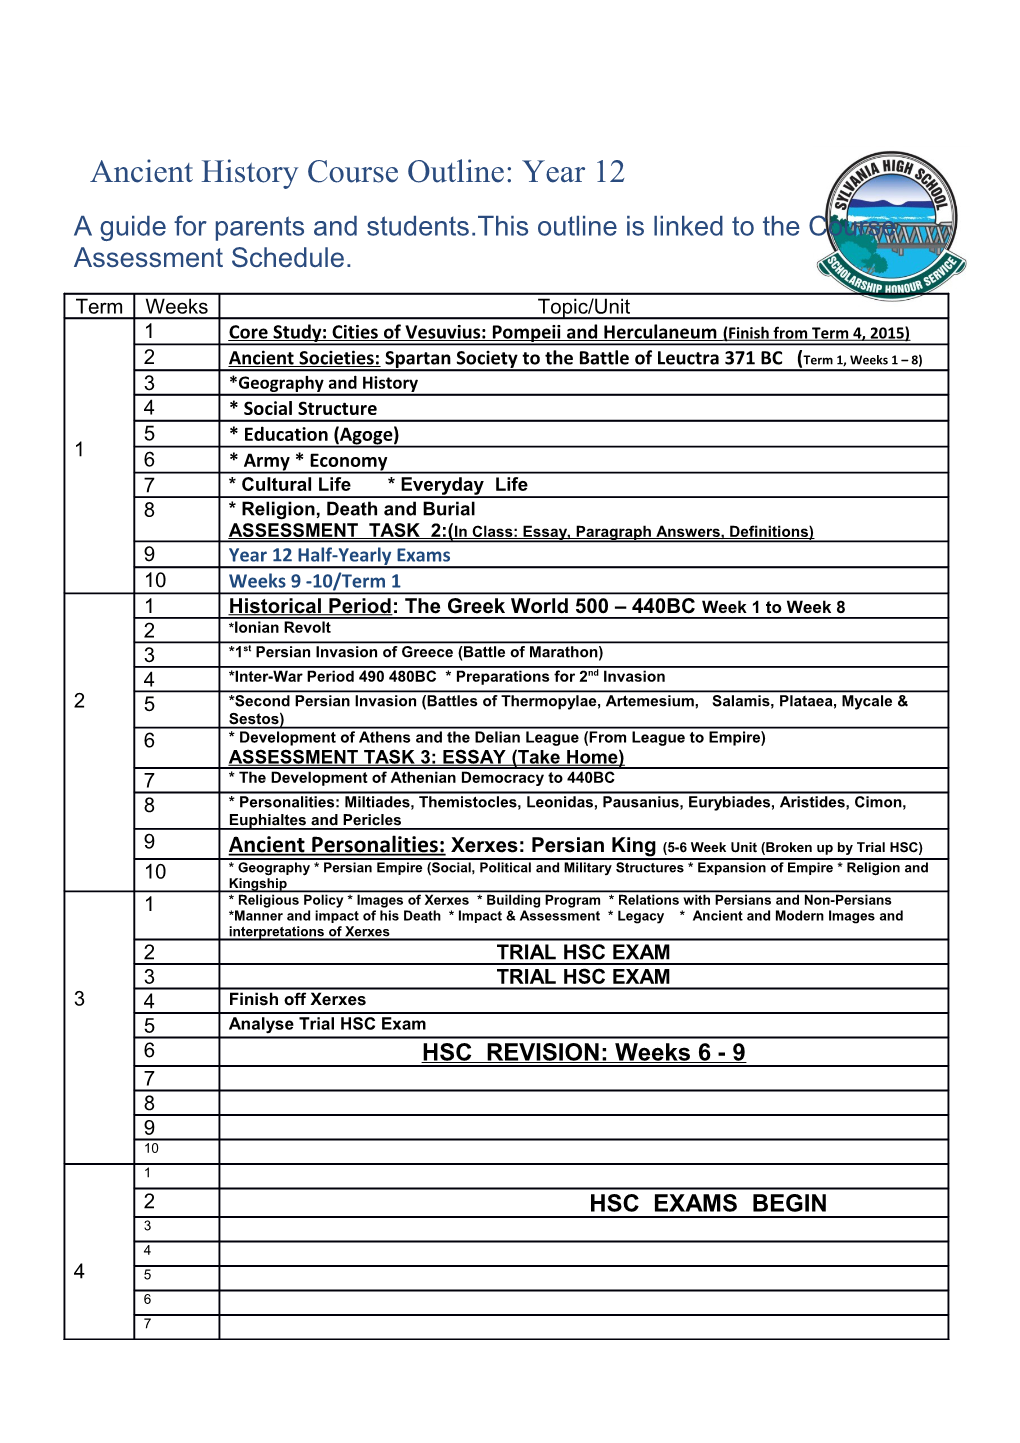 A Guide for Parents and Students. This Outline Is Linked to the Course Assessment Schedule